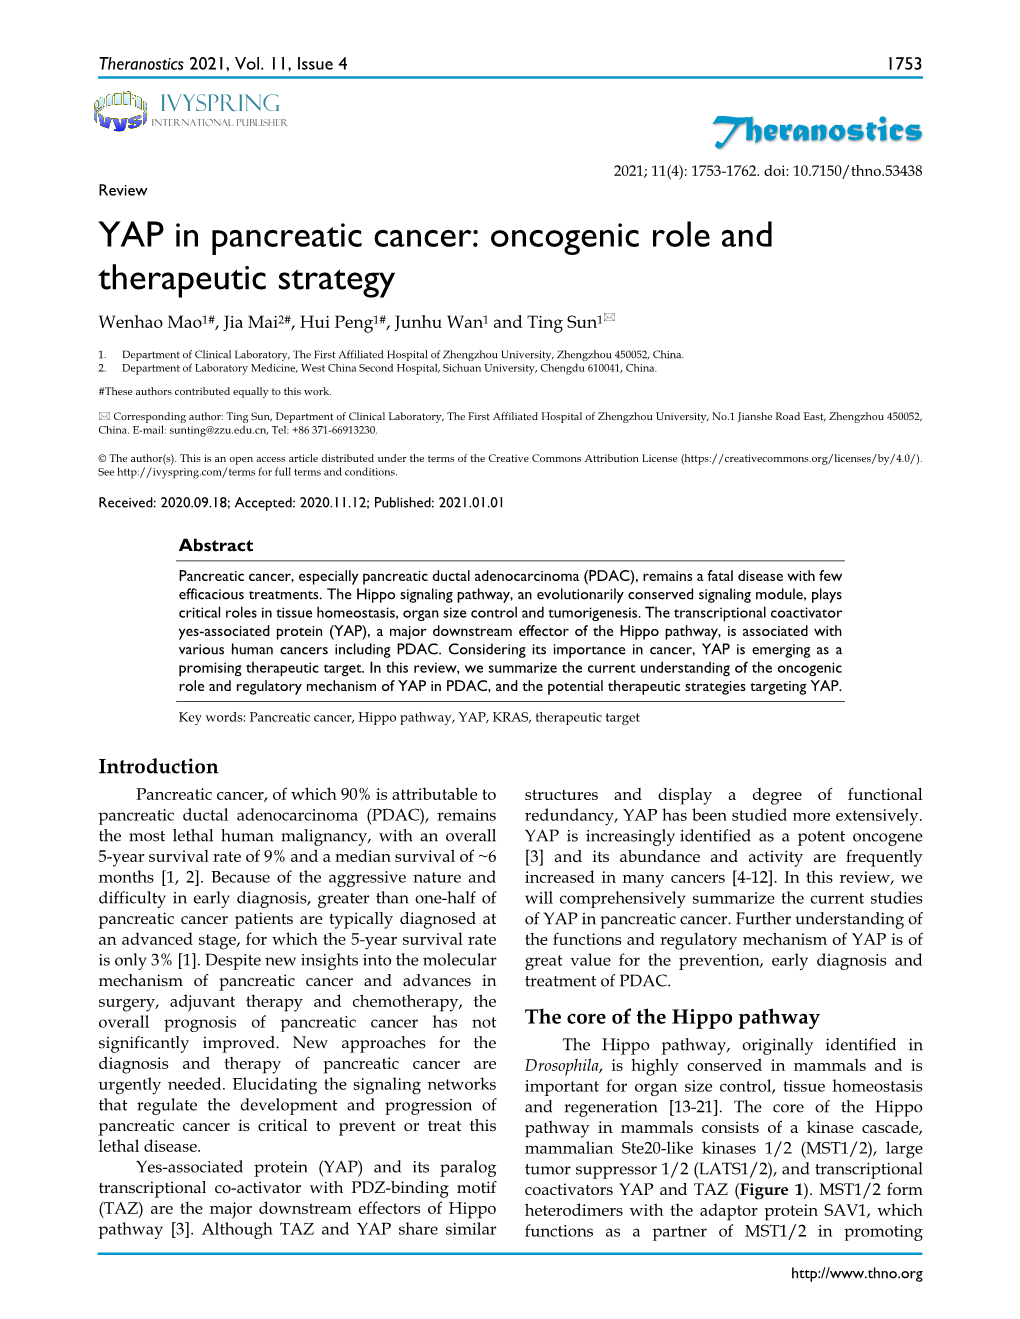 Theranostics YAP in Pancreatic Cancer: Oncogenic Role And